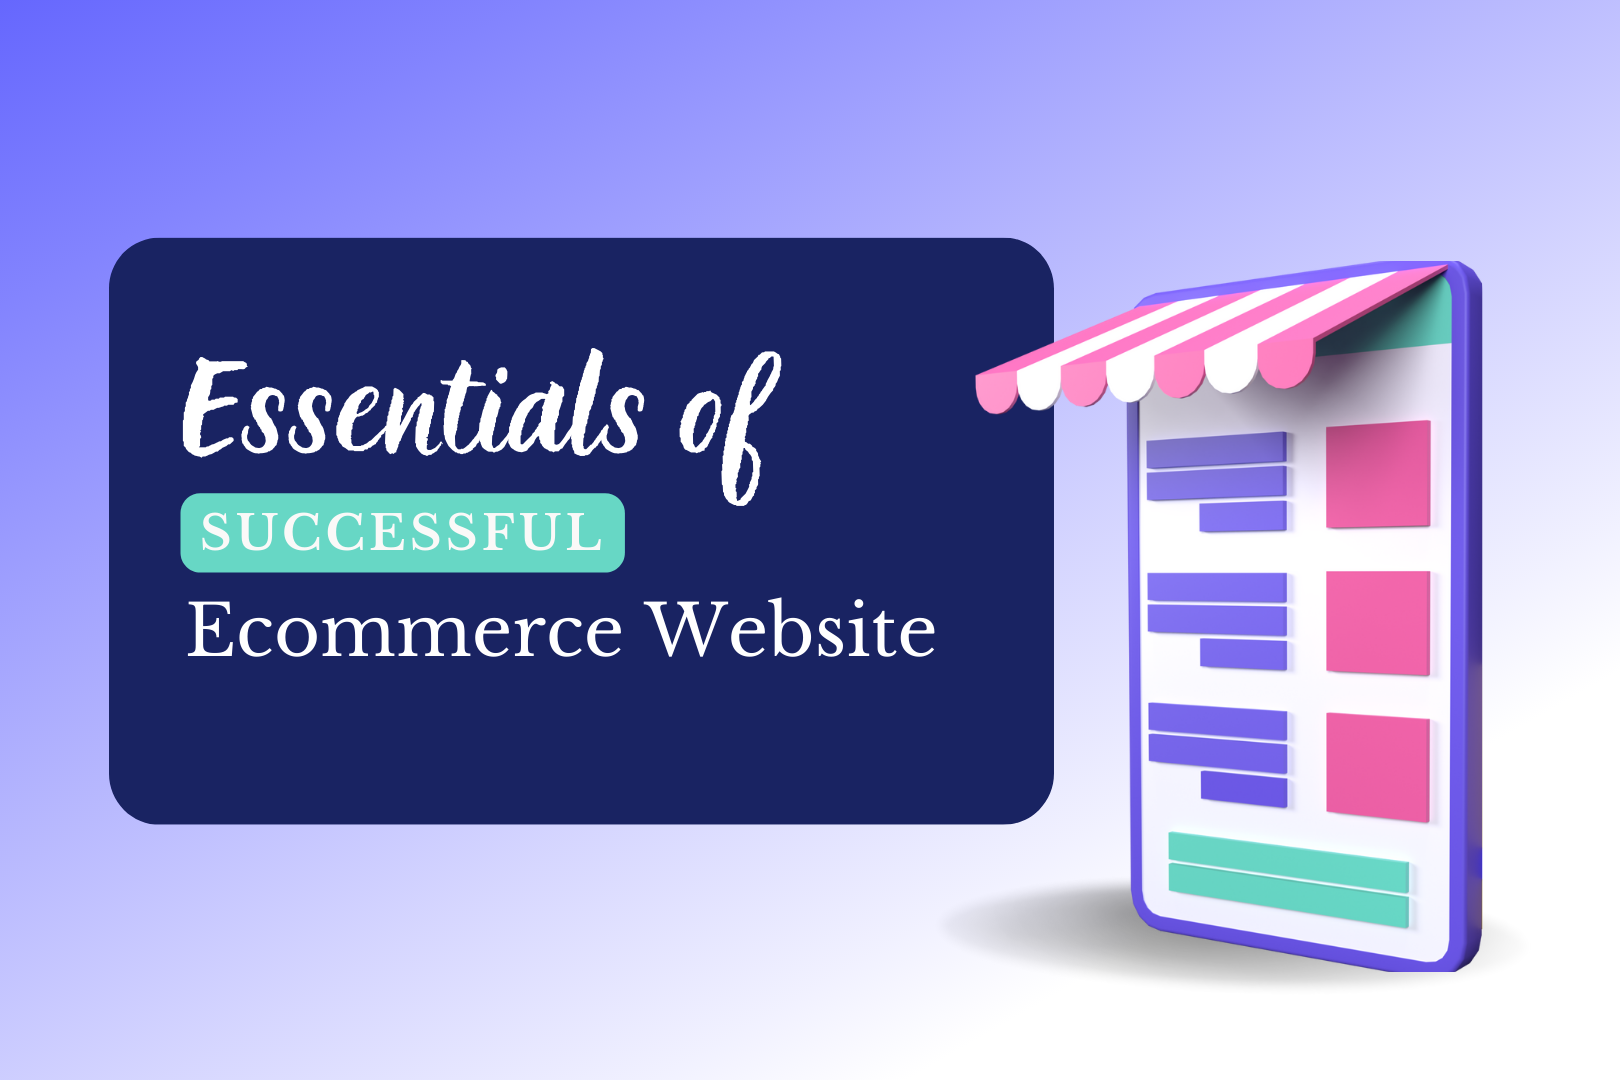 Essential Elements for Successful Ecommerce Website